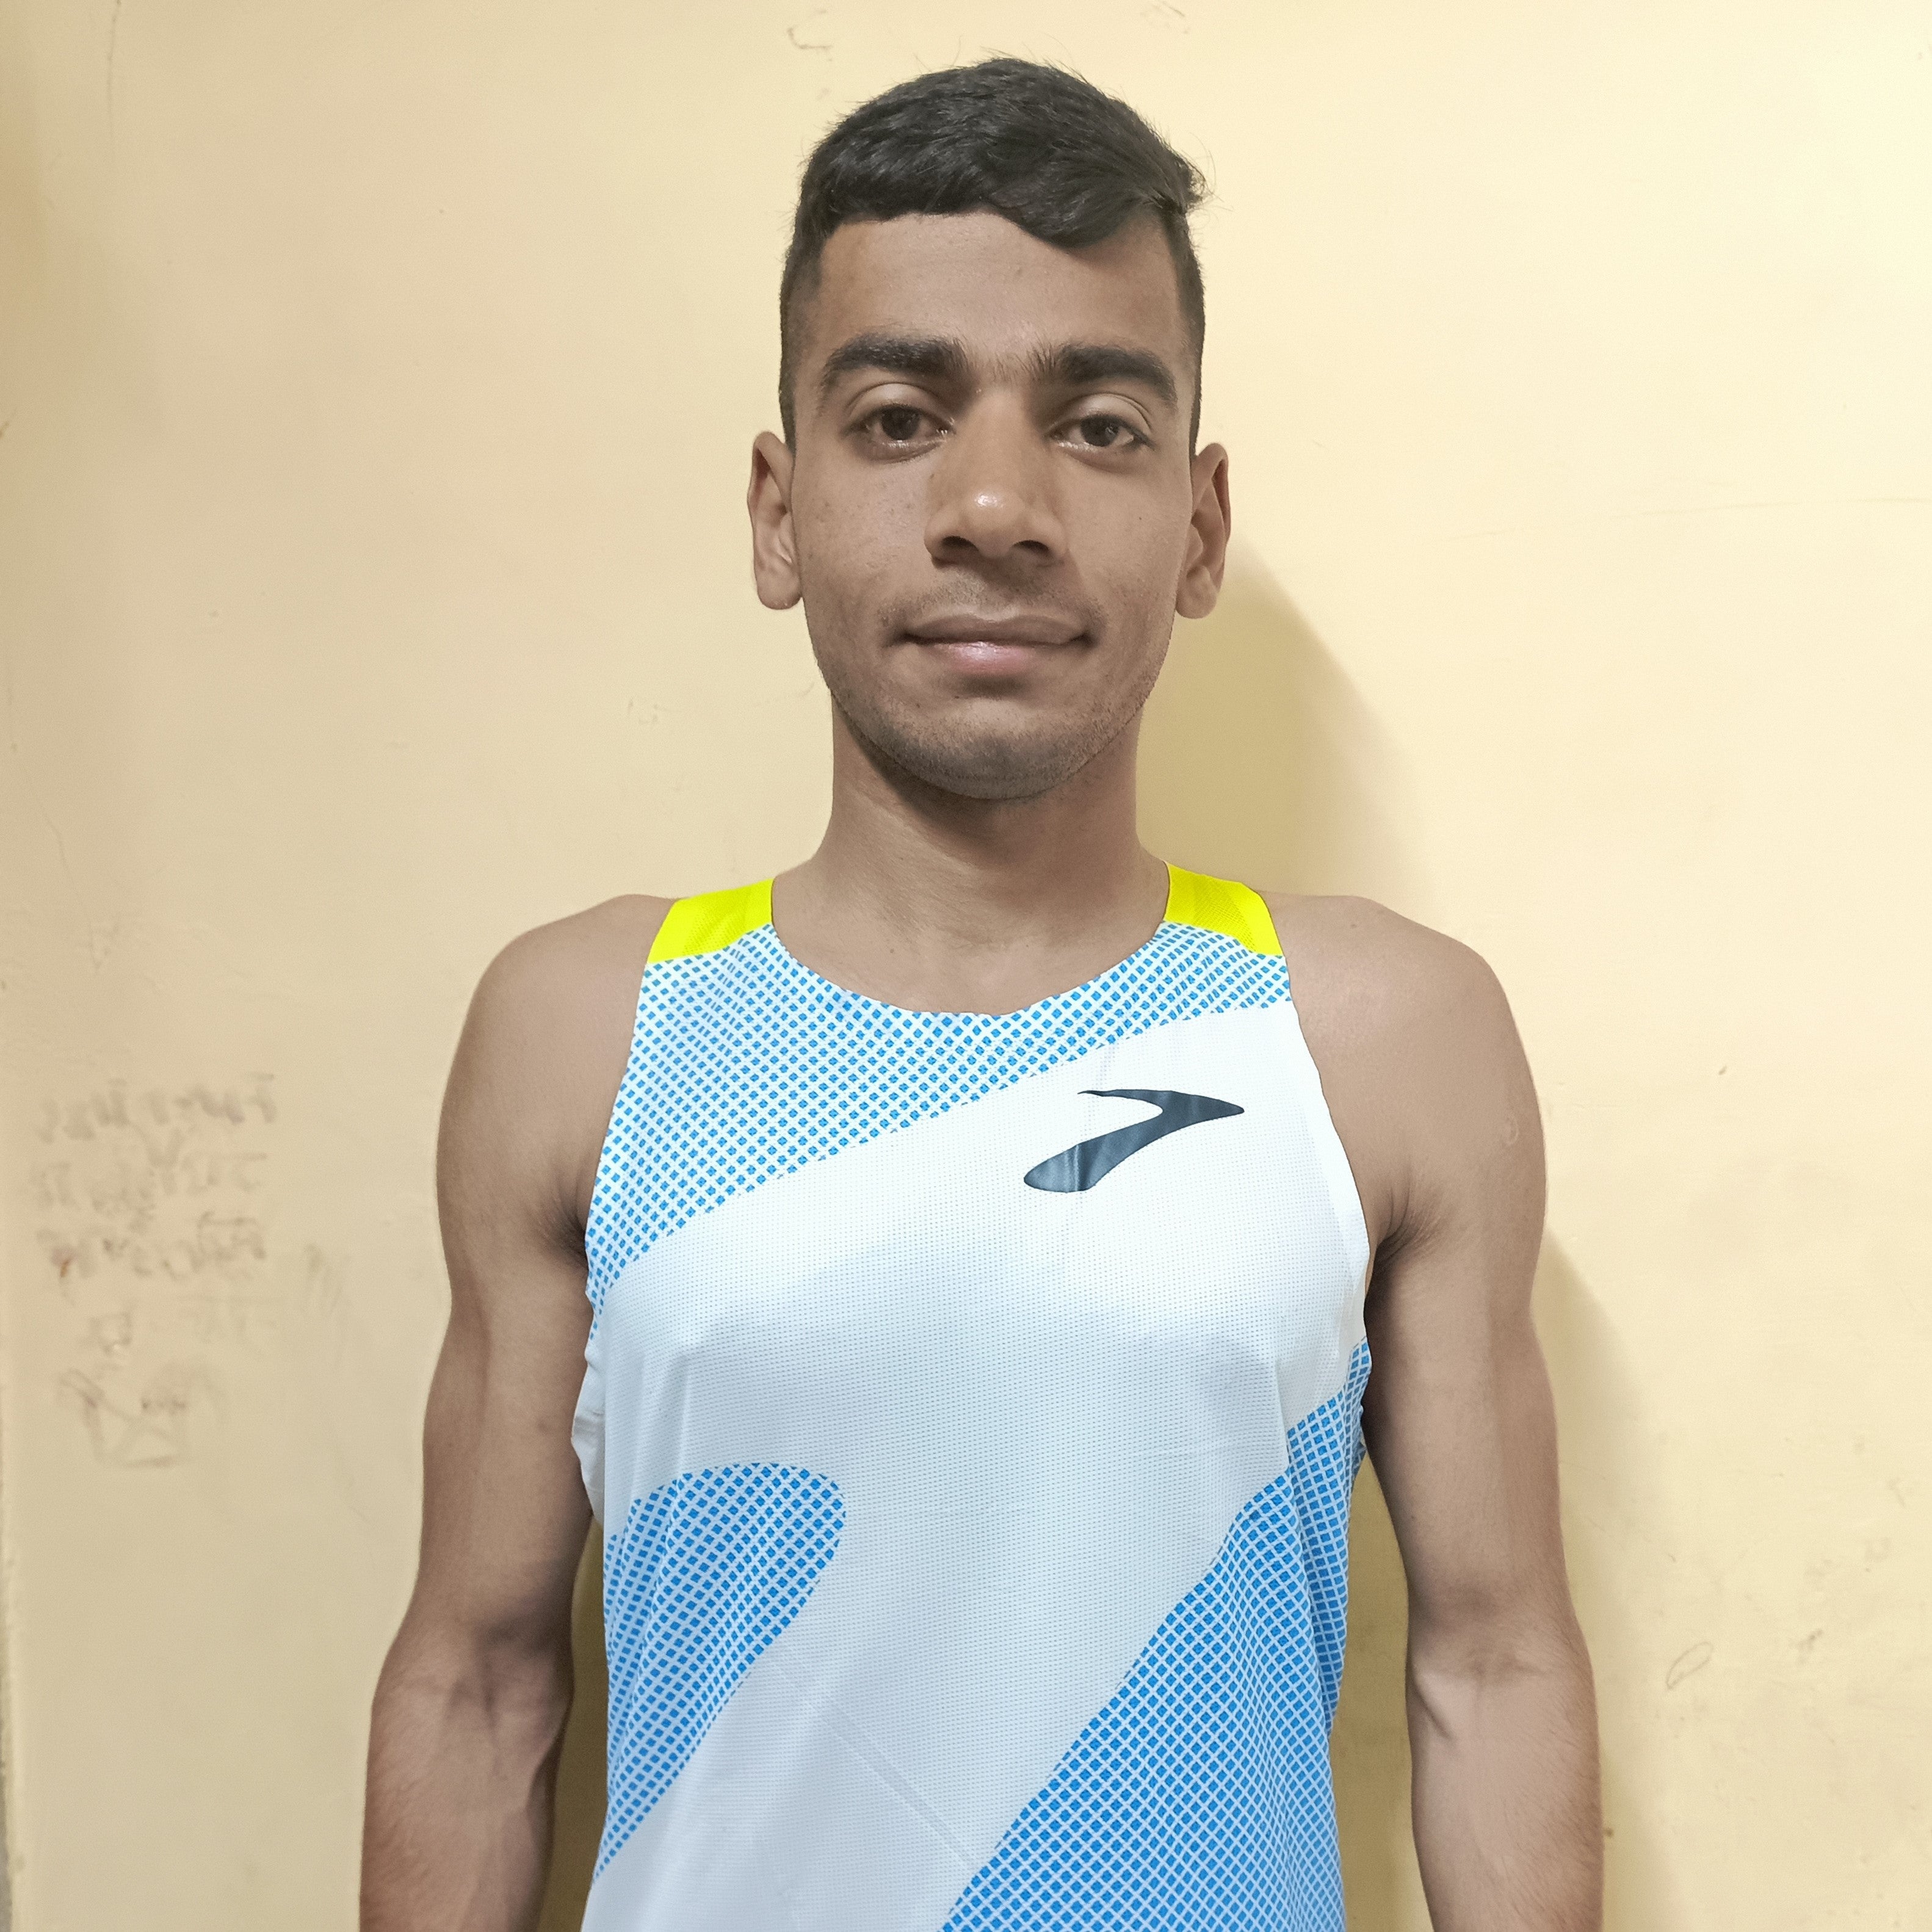 Pinnacle of Athletic Achievement: Setting a New National Record in 100km Ultra Running at the 100km World Championship in Berlin 2022, Representing India!